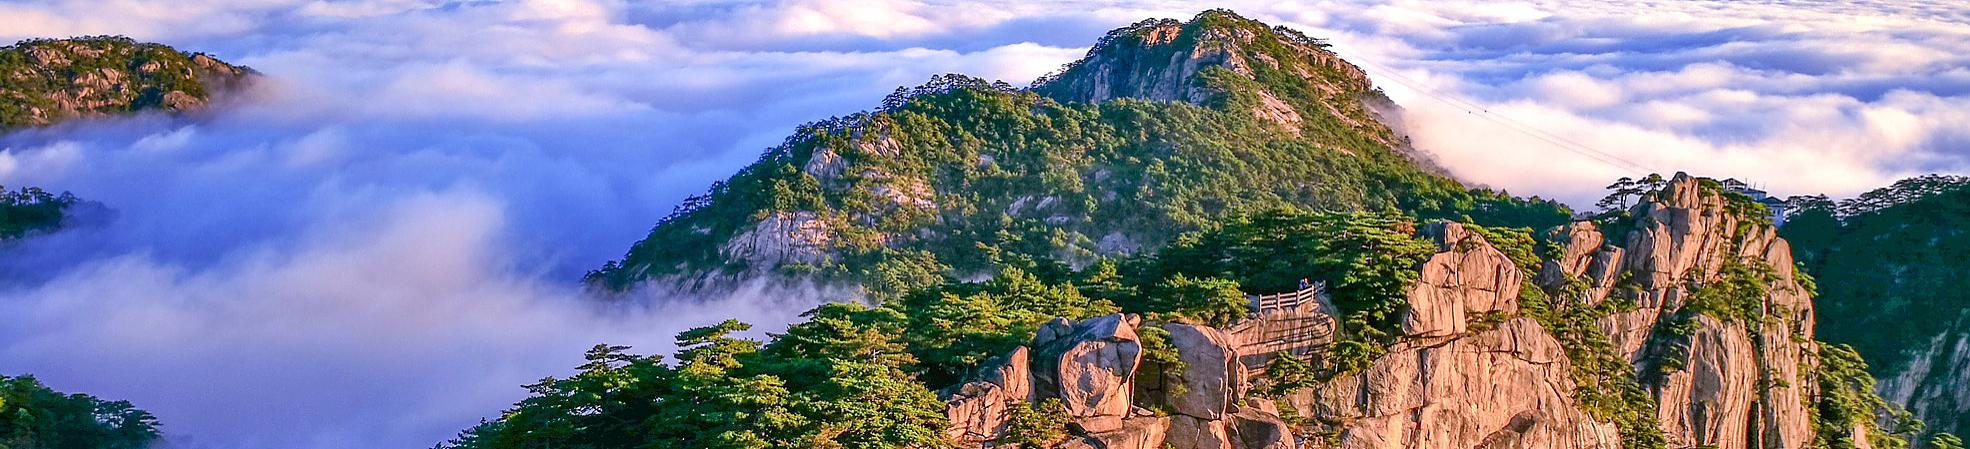 Cloud Valley Scenic Area of Huangshan